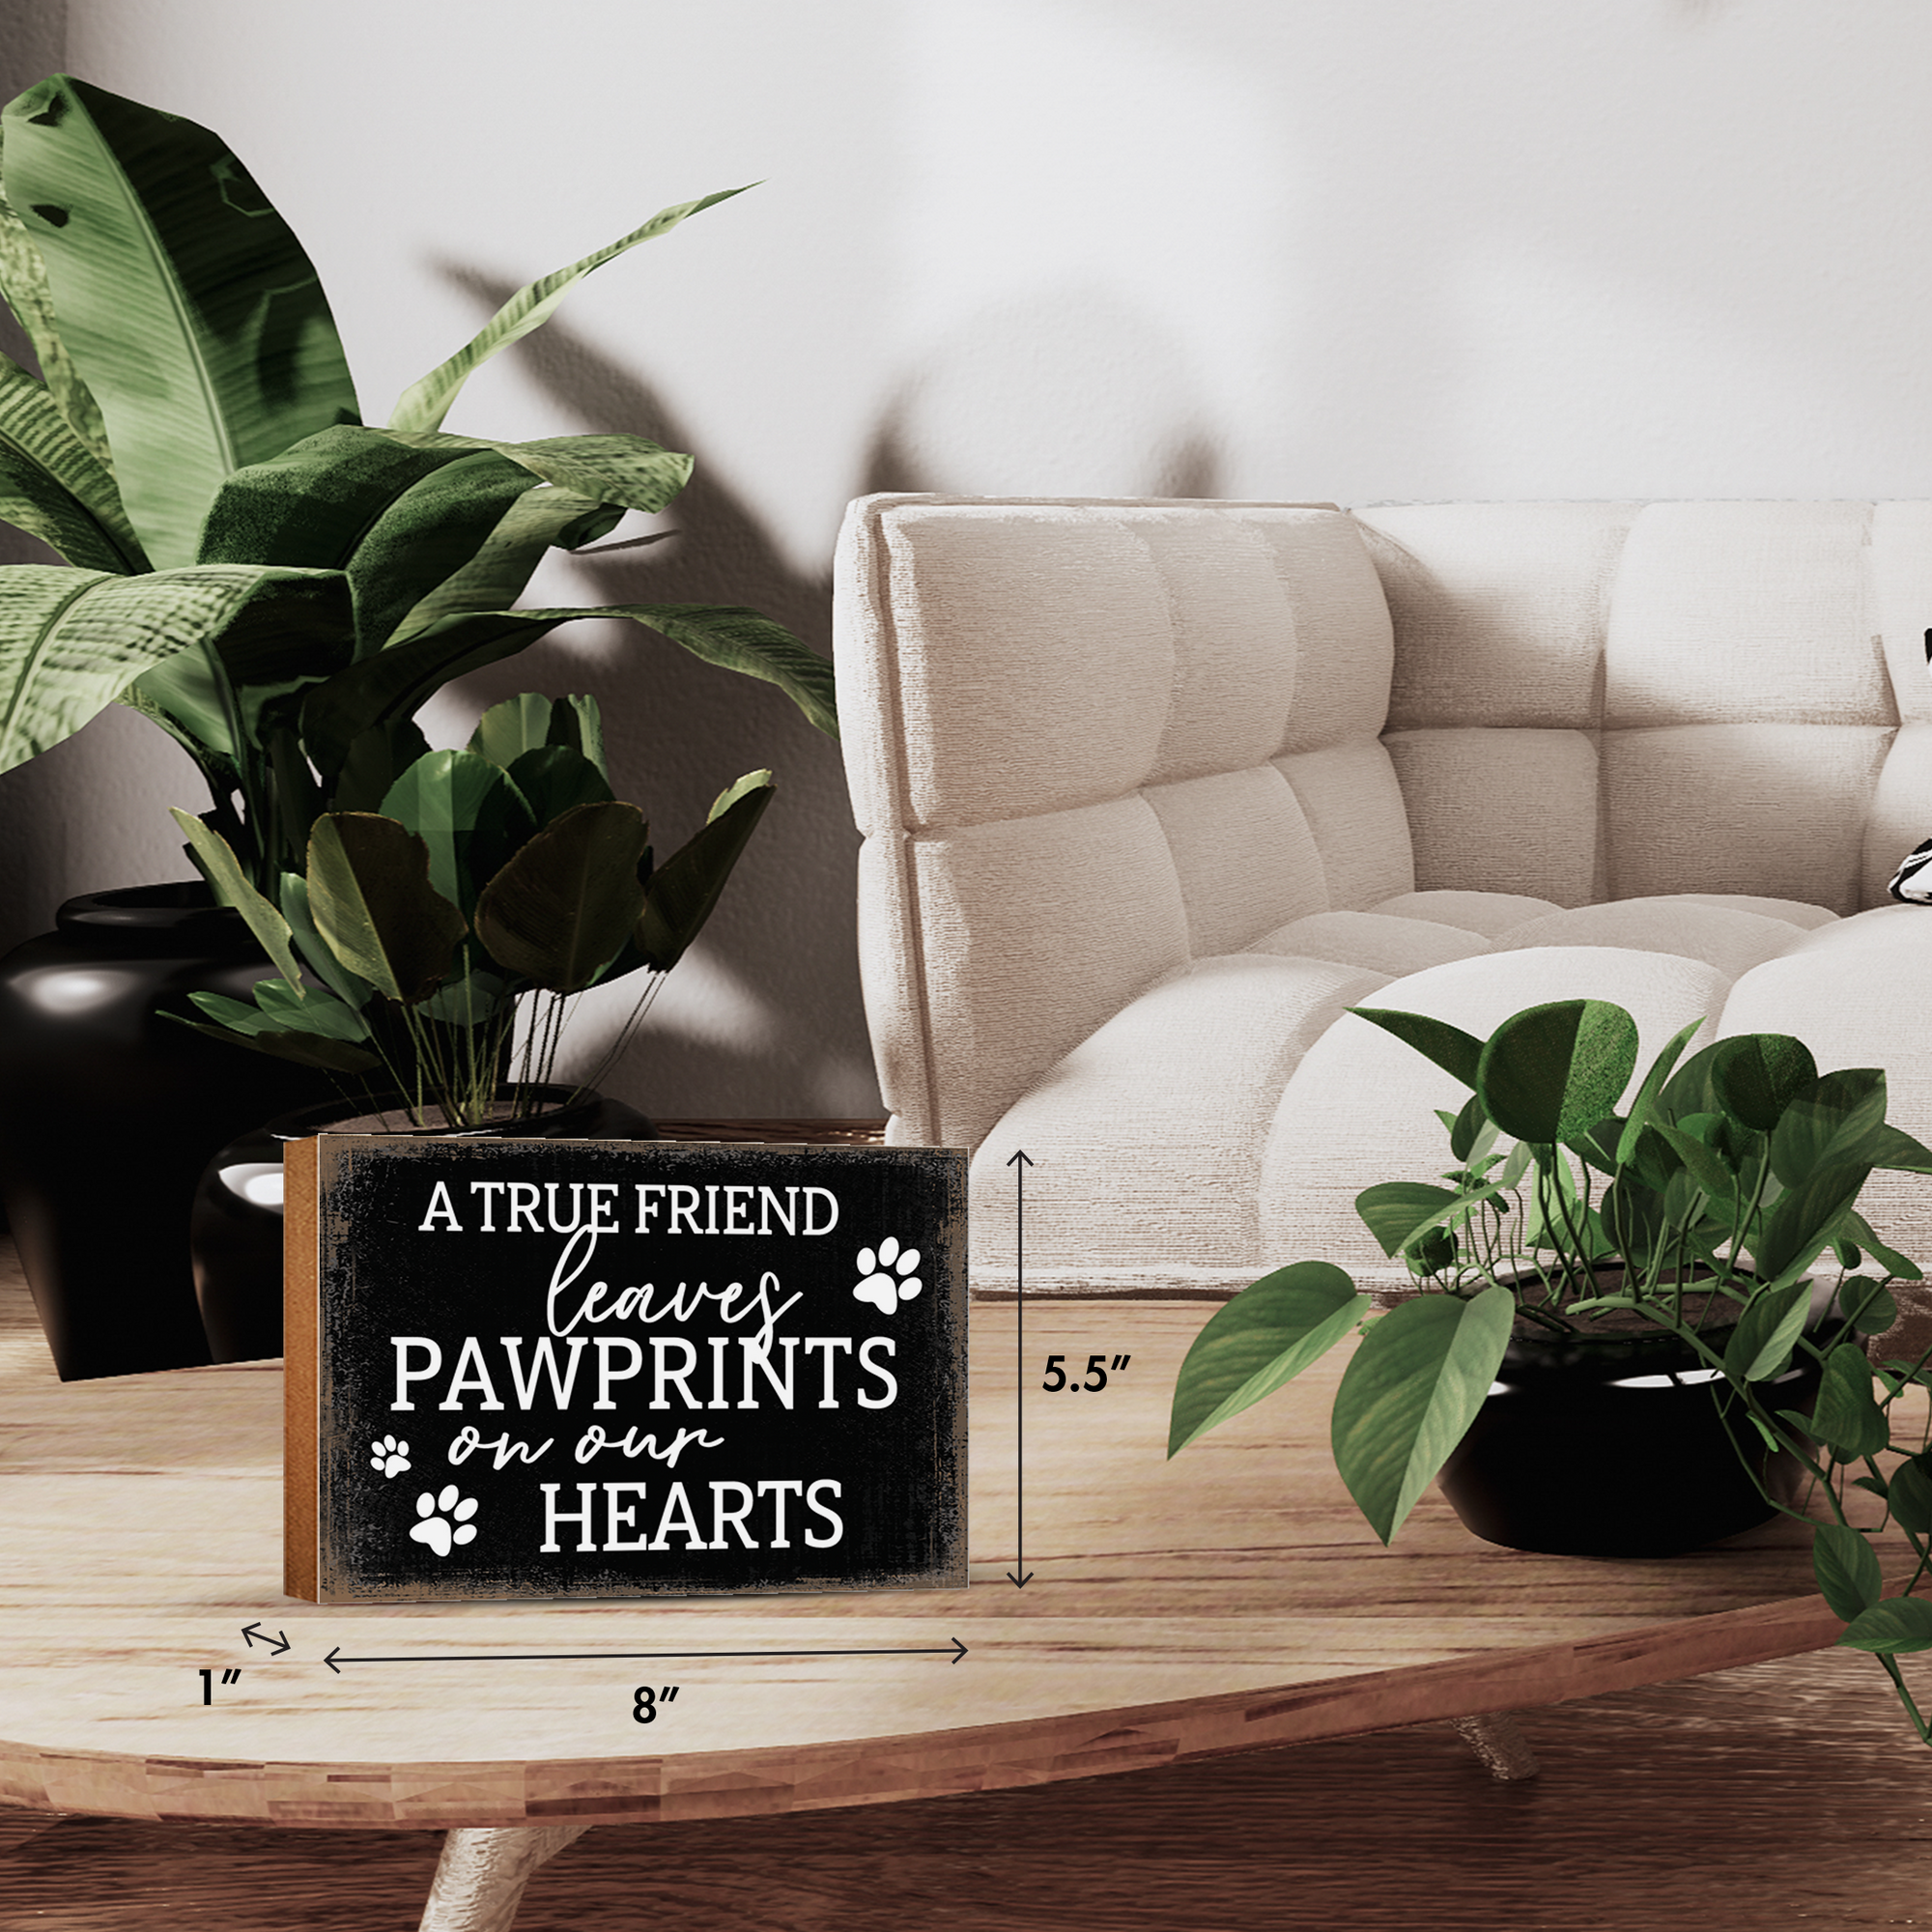 Wooden Shelf Decor and Tabletop Signs with Pet Verses - A True Friend